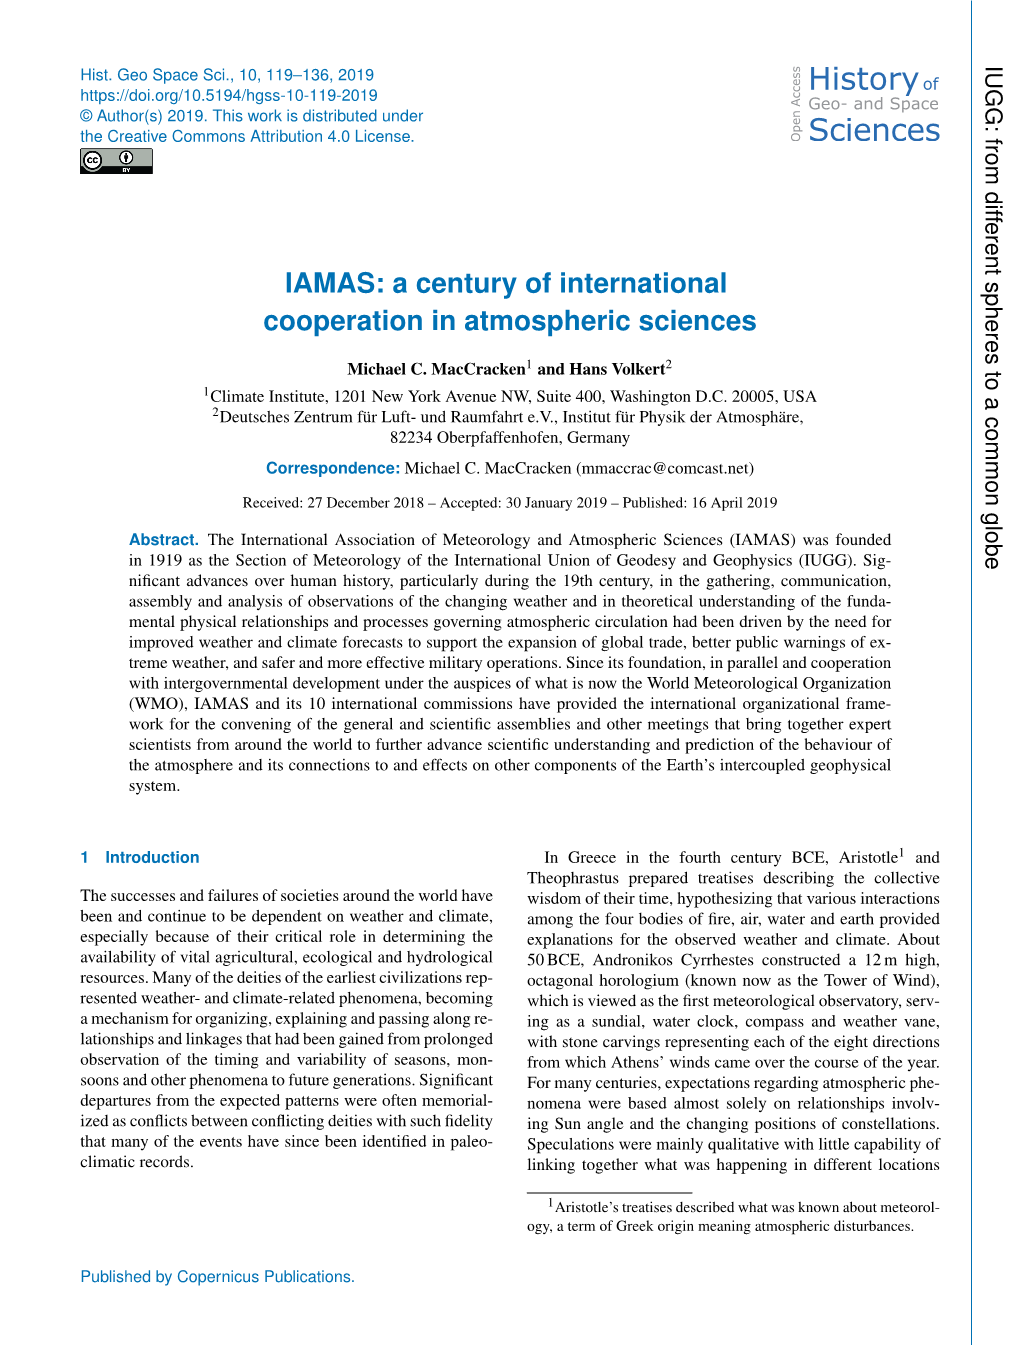 Article on the History of IUGG (Ismail-Zadeh and Joselyn, 2019)